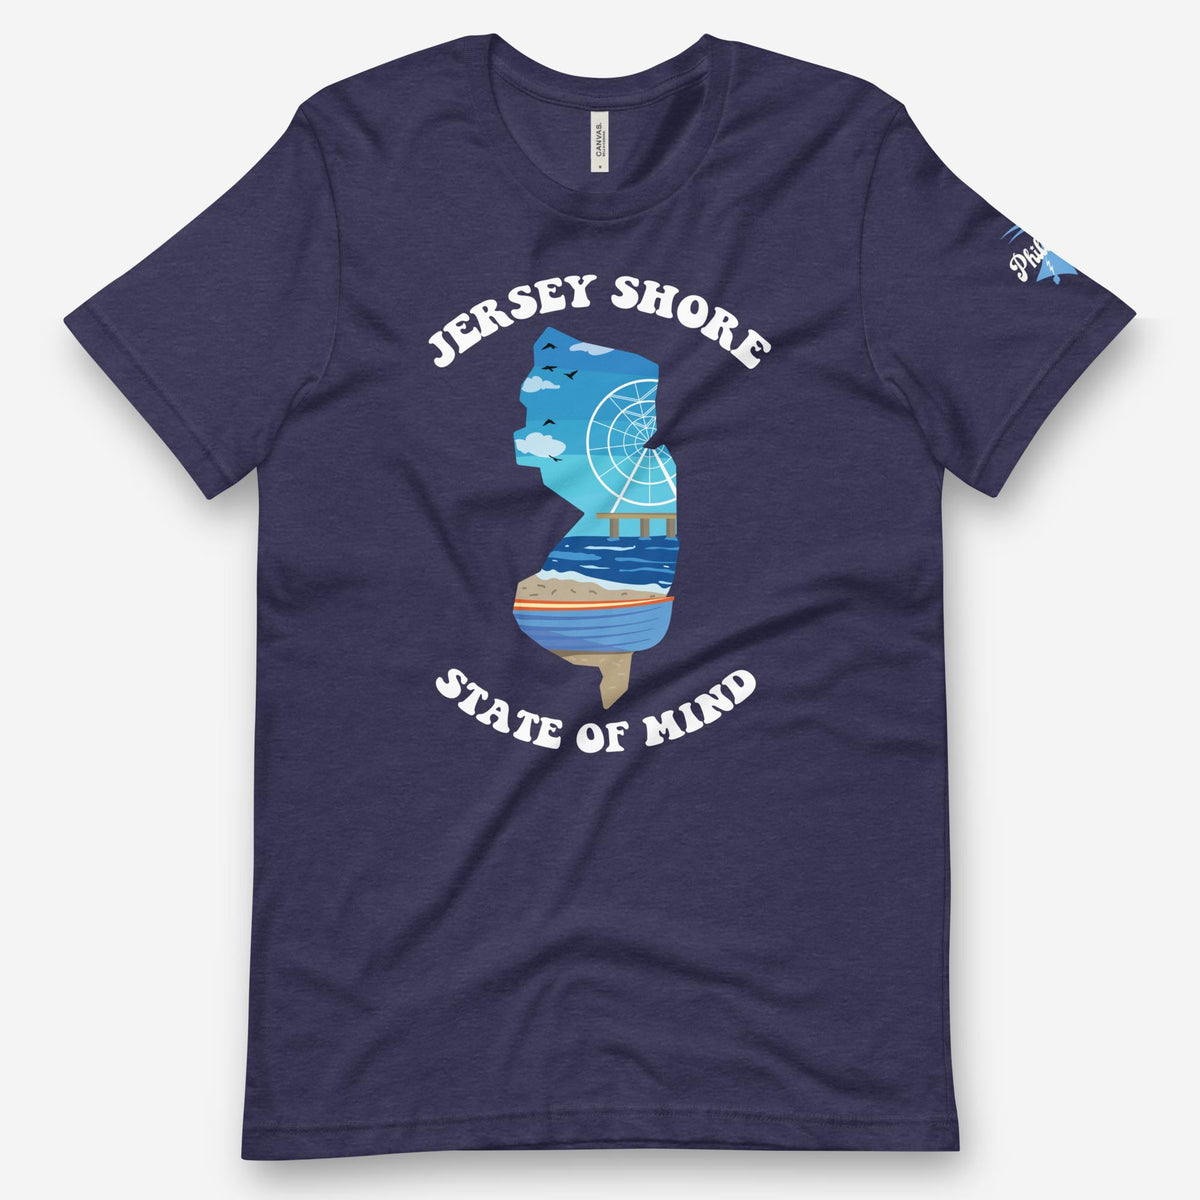 &quot;Jersey Shore State of Mind&quot; Tee